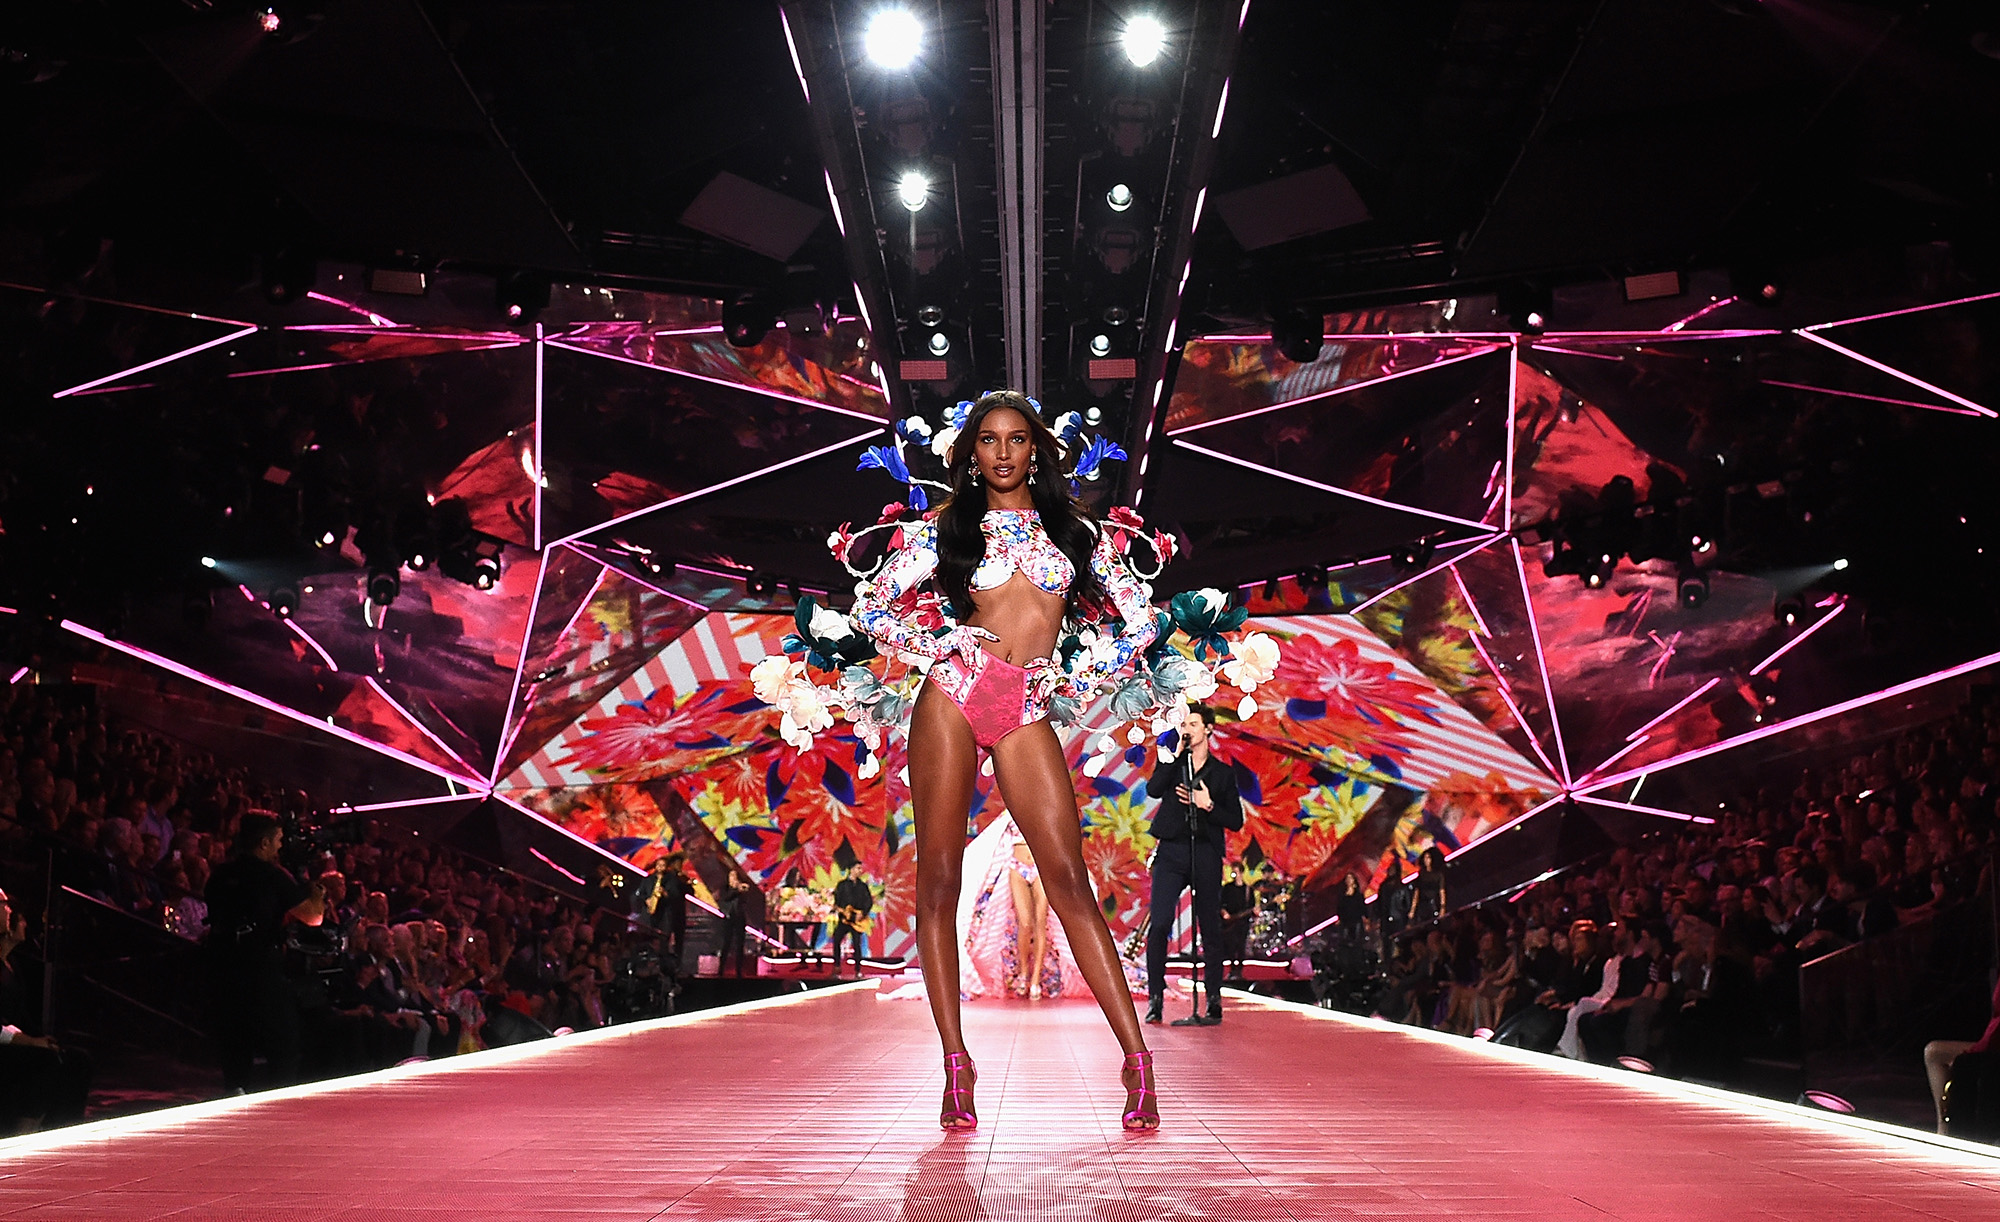 Victoria's Secret Fashion Show 2019? Won't Be On TV This Year - Bloomberg